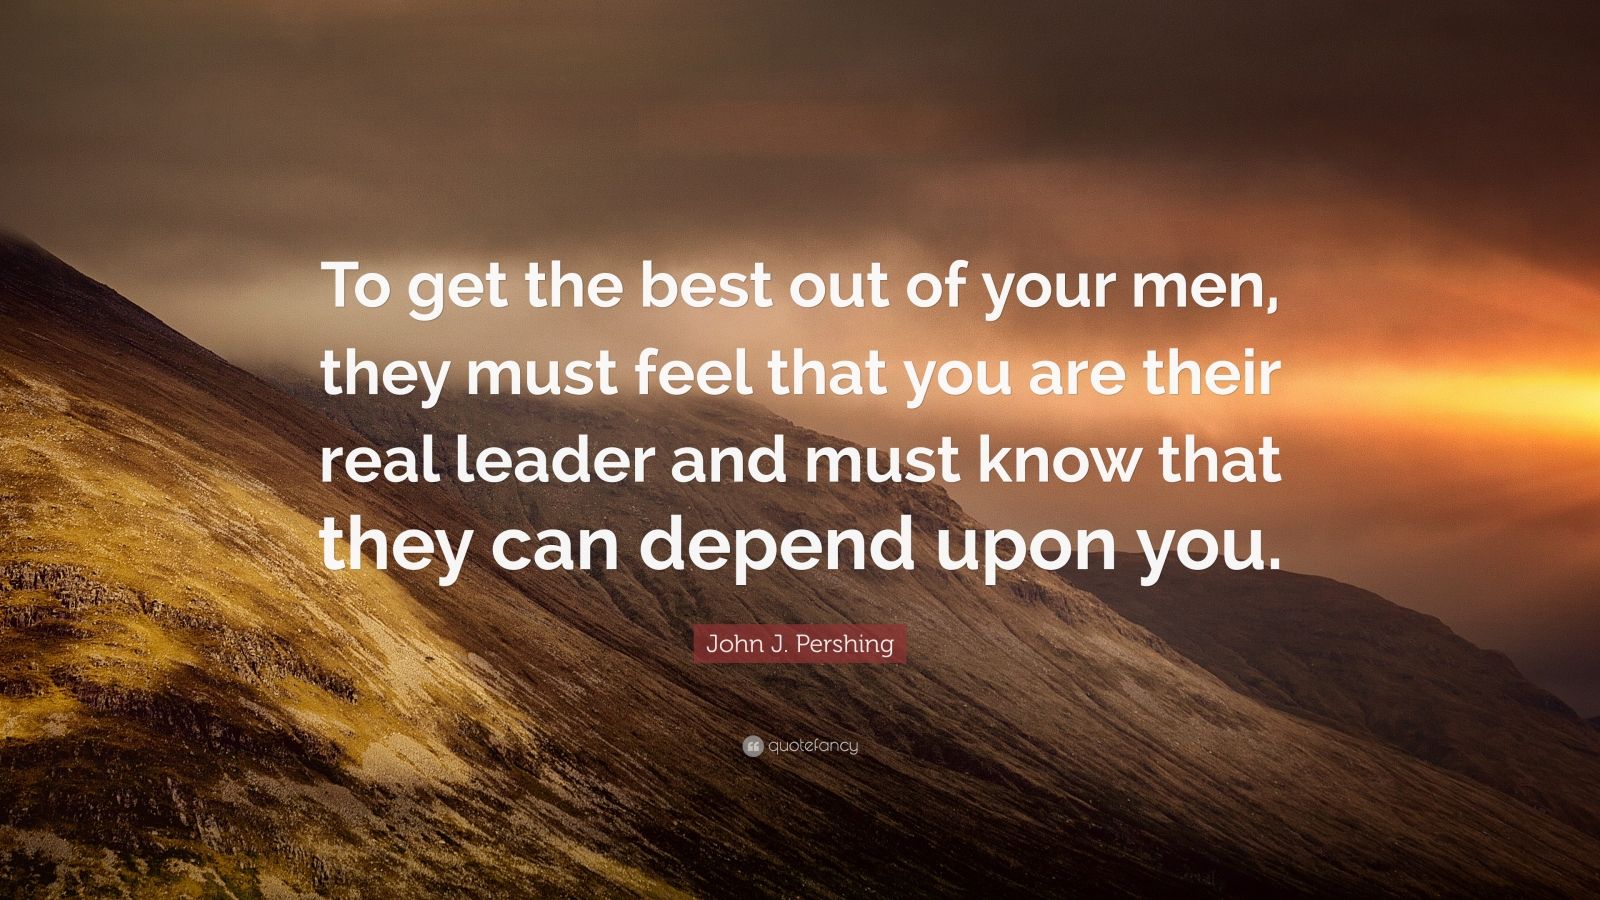 John J. Pershing Quote: “To get the best out of your men, they must